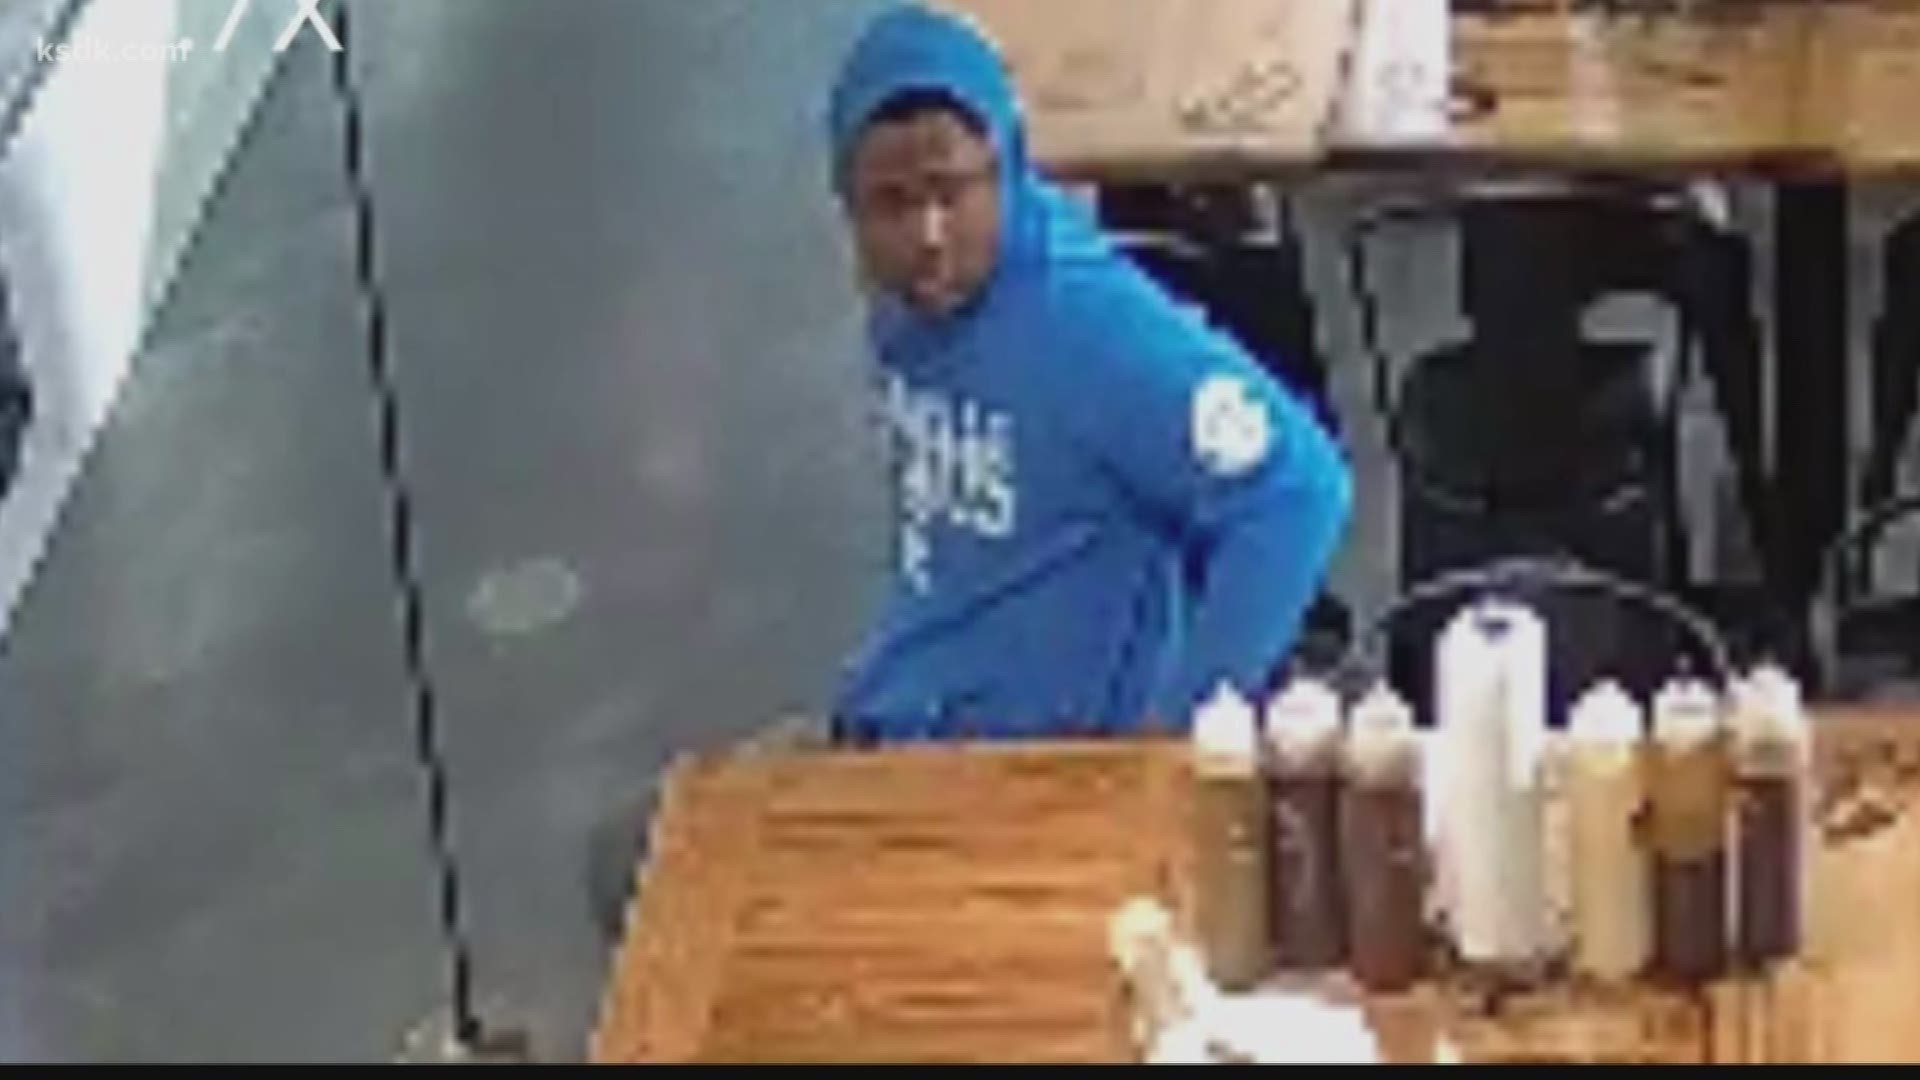 The man walked up to the counter in a University of Kentucky sweatshirt and asked for a job application. While the manager was getting one, he swiped the tip jar.